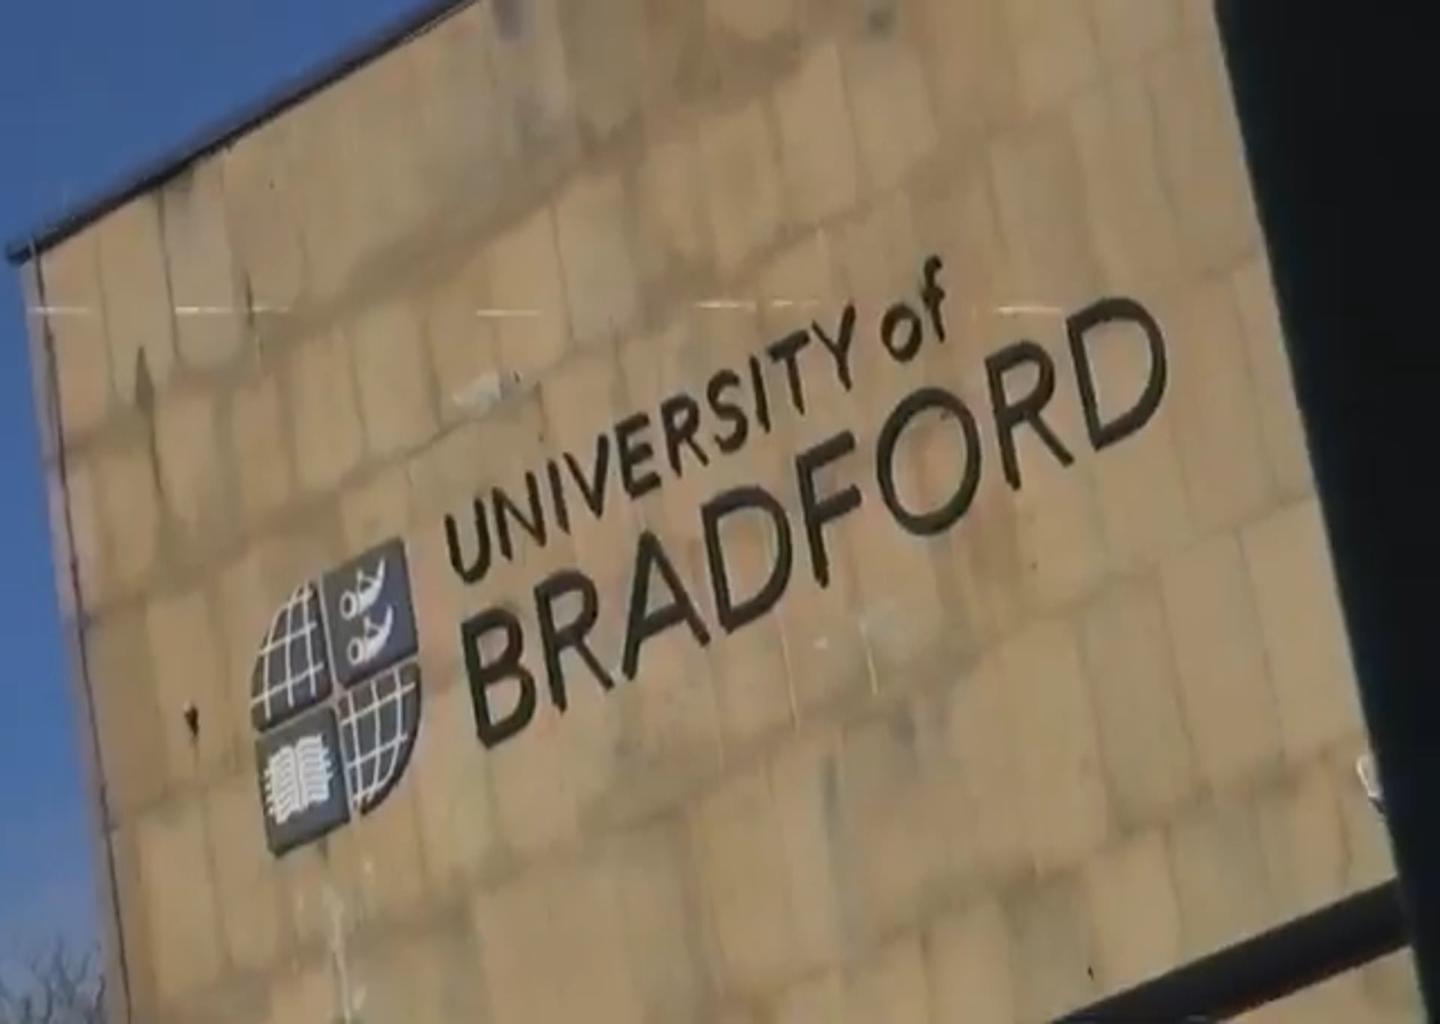 University of Bradford: Fees, Reviews, Rankings, Courses & Contact info